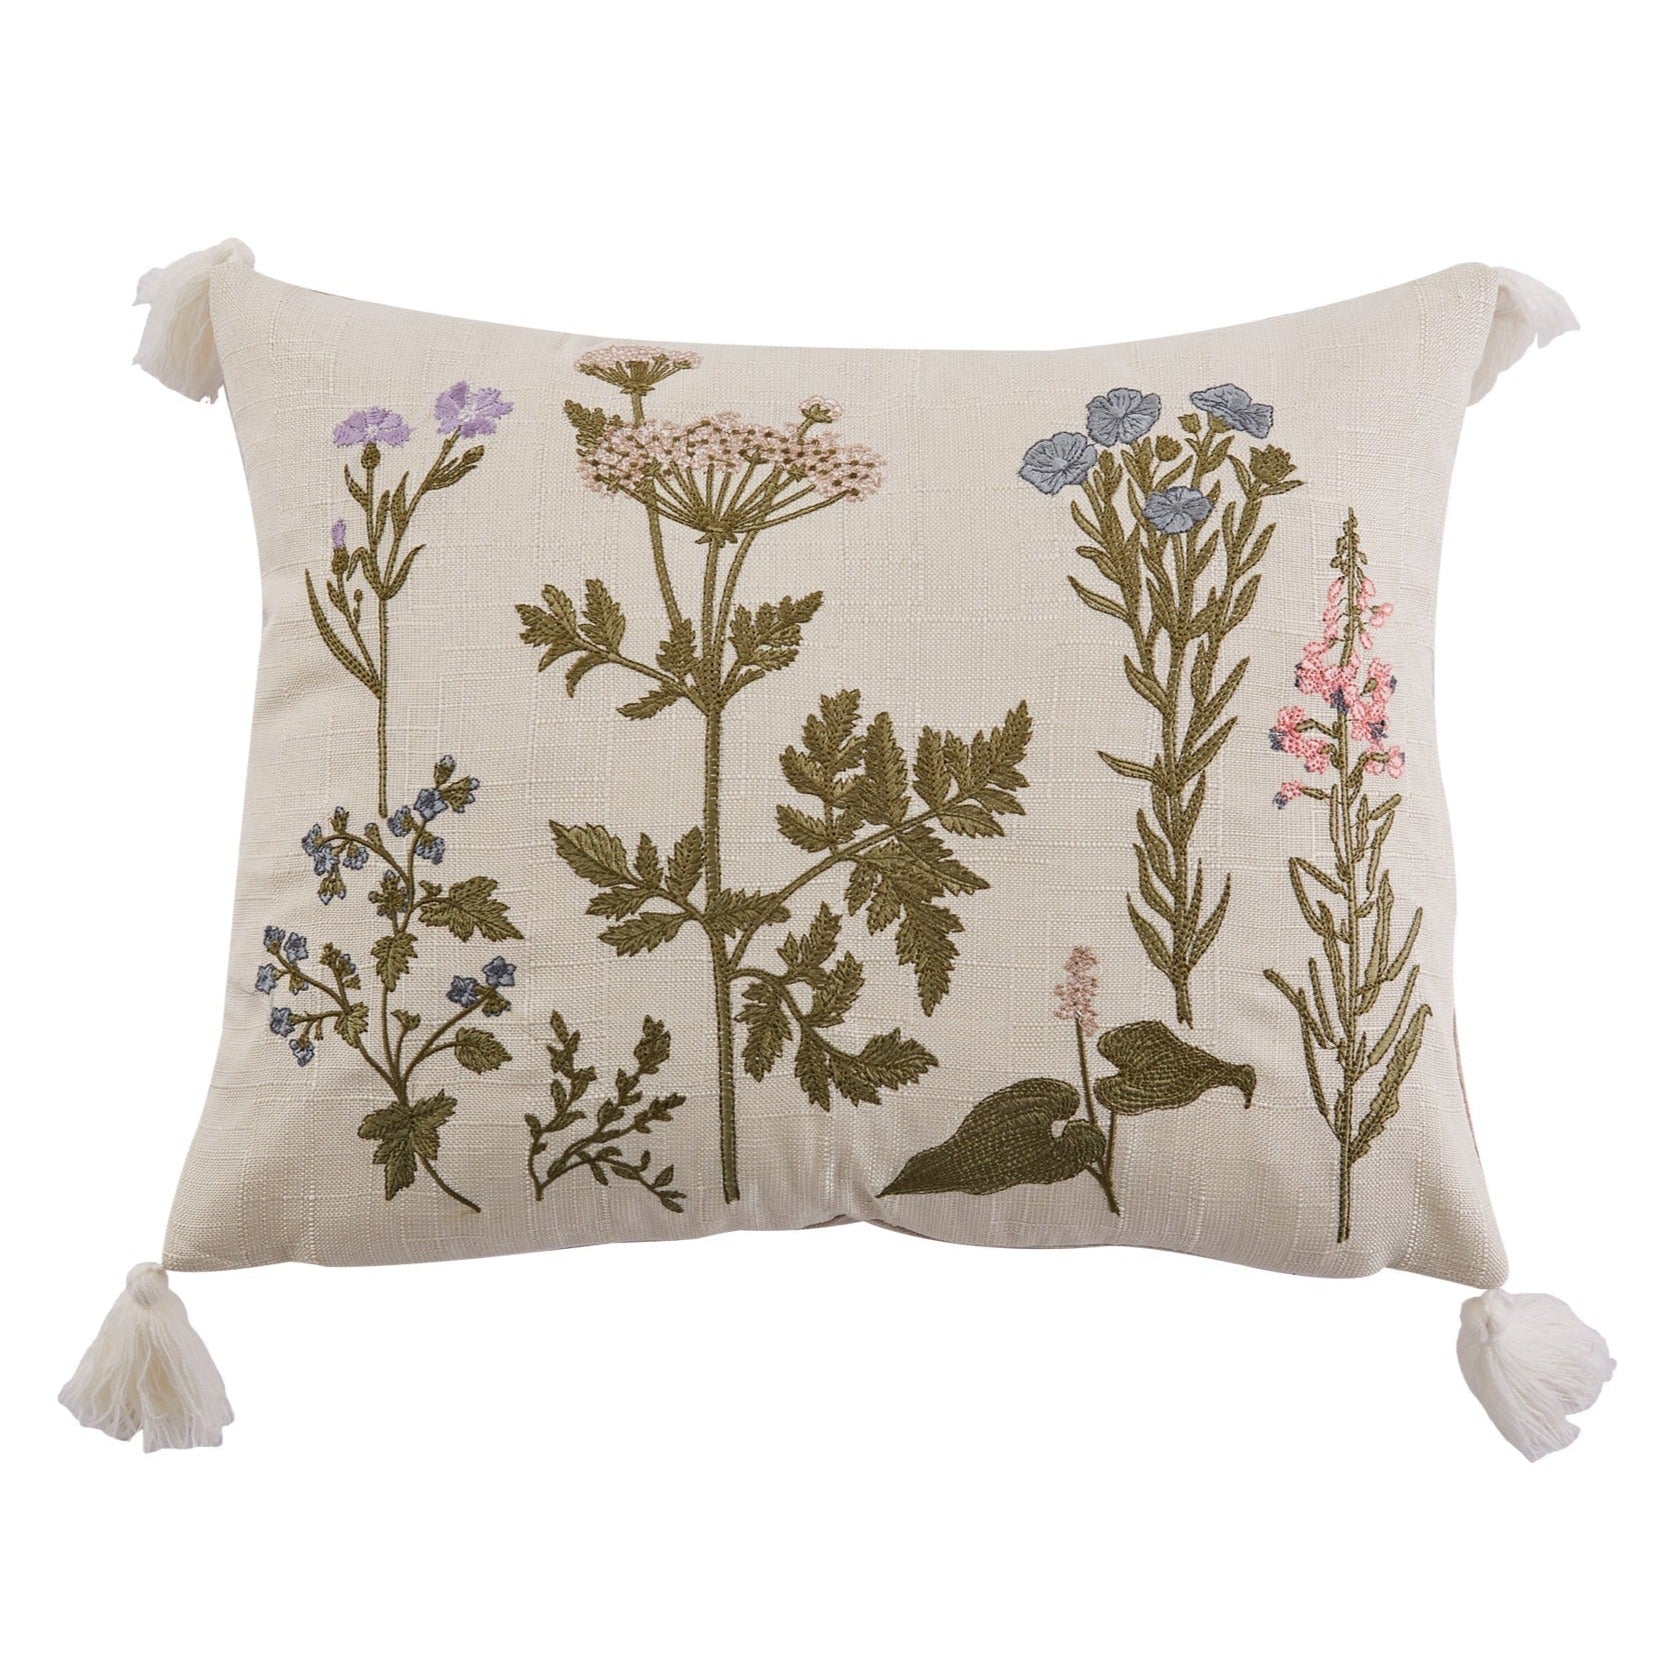 Apolonia Floral Embroidered Pillow